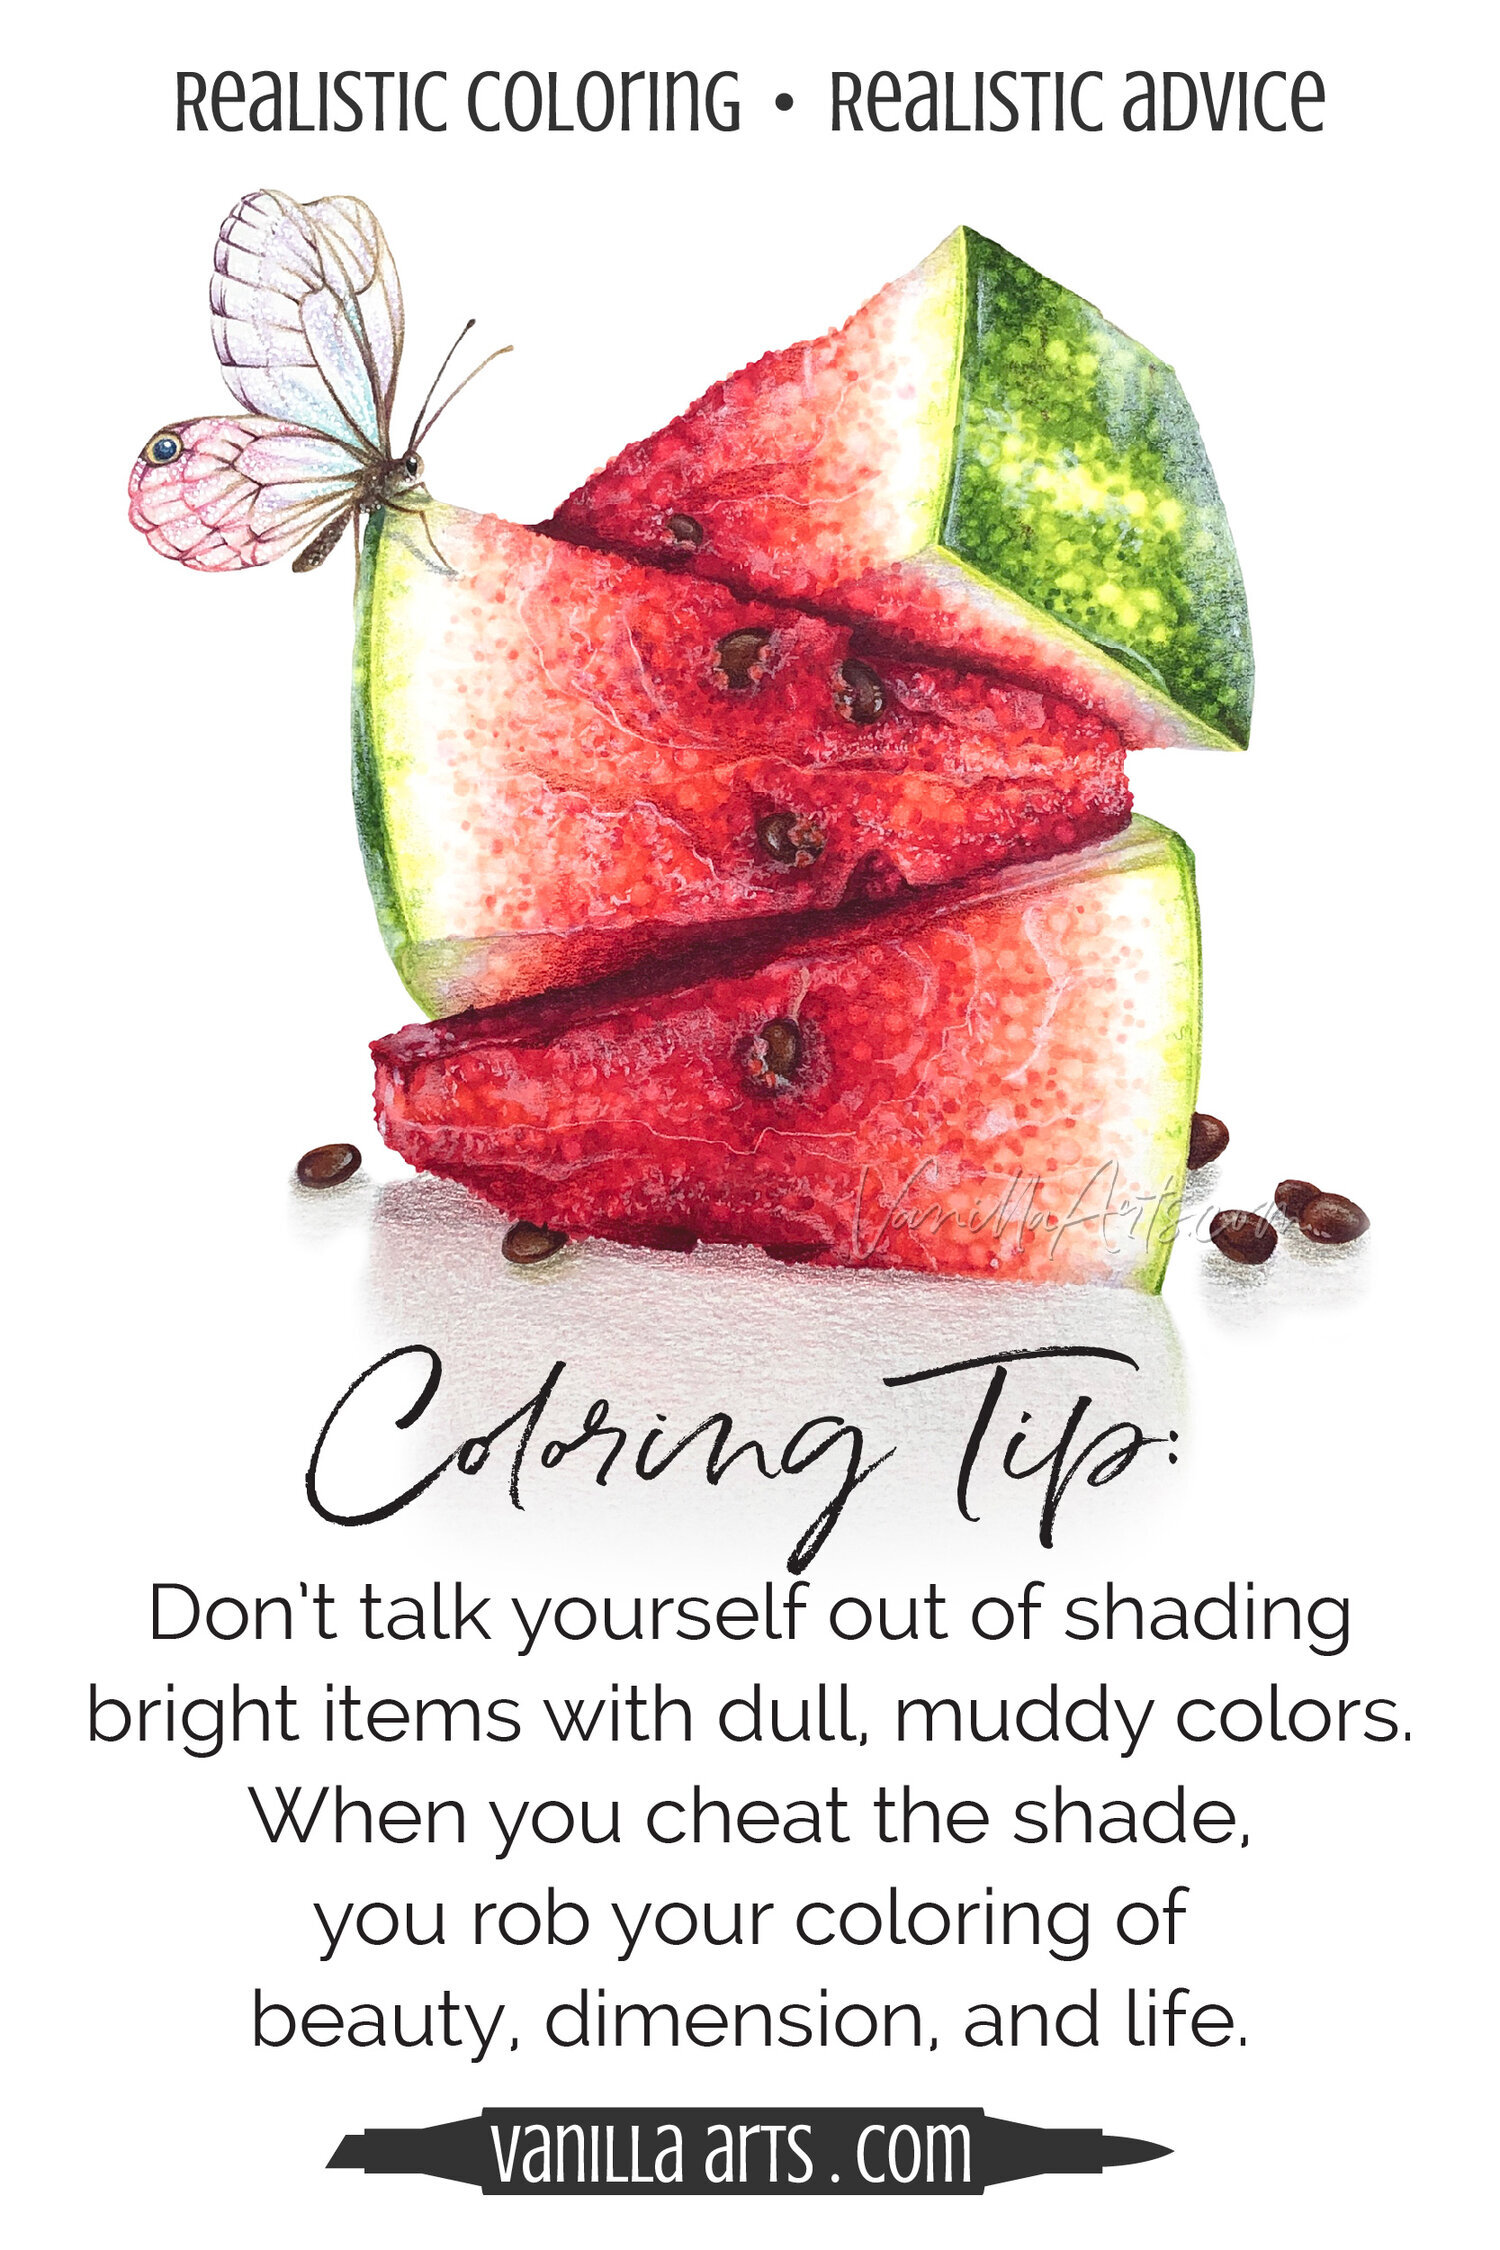 Coloring Tip: Don't Talk Yourself Out of Realistic Shade Colors